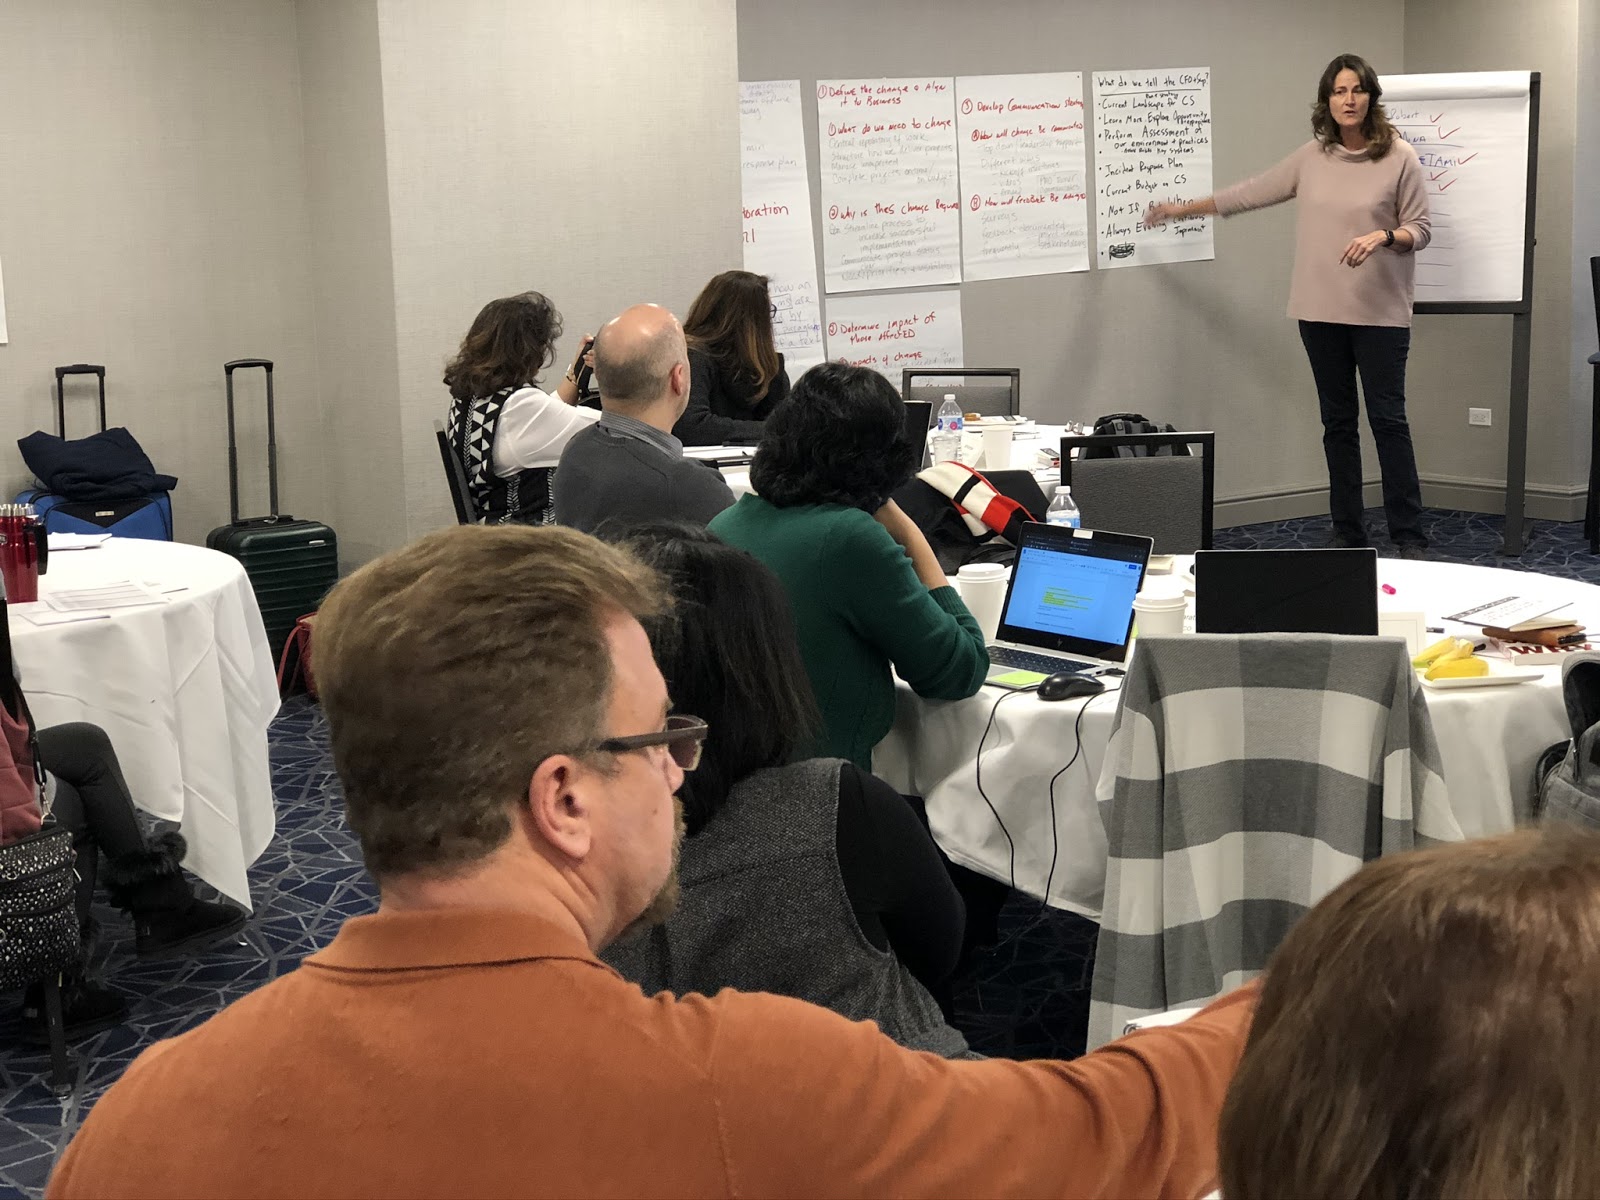 2019 Chicago Cohort in group feedback session.